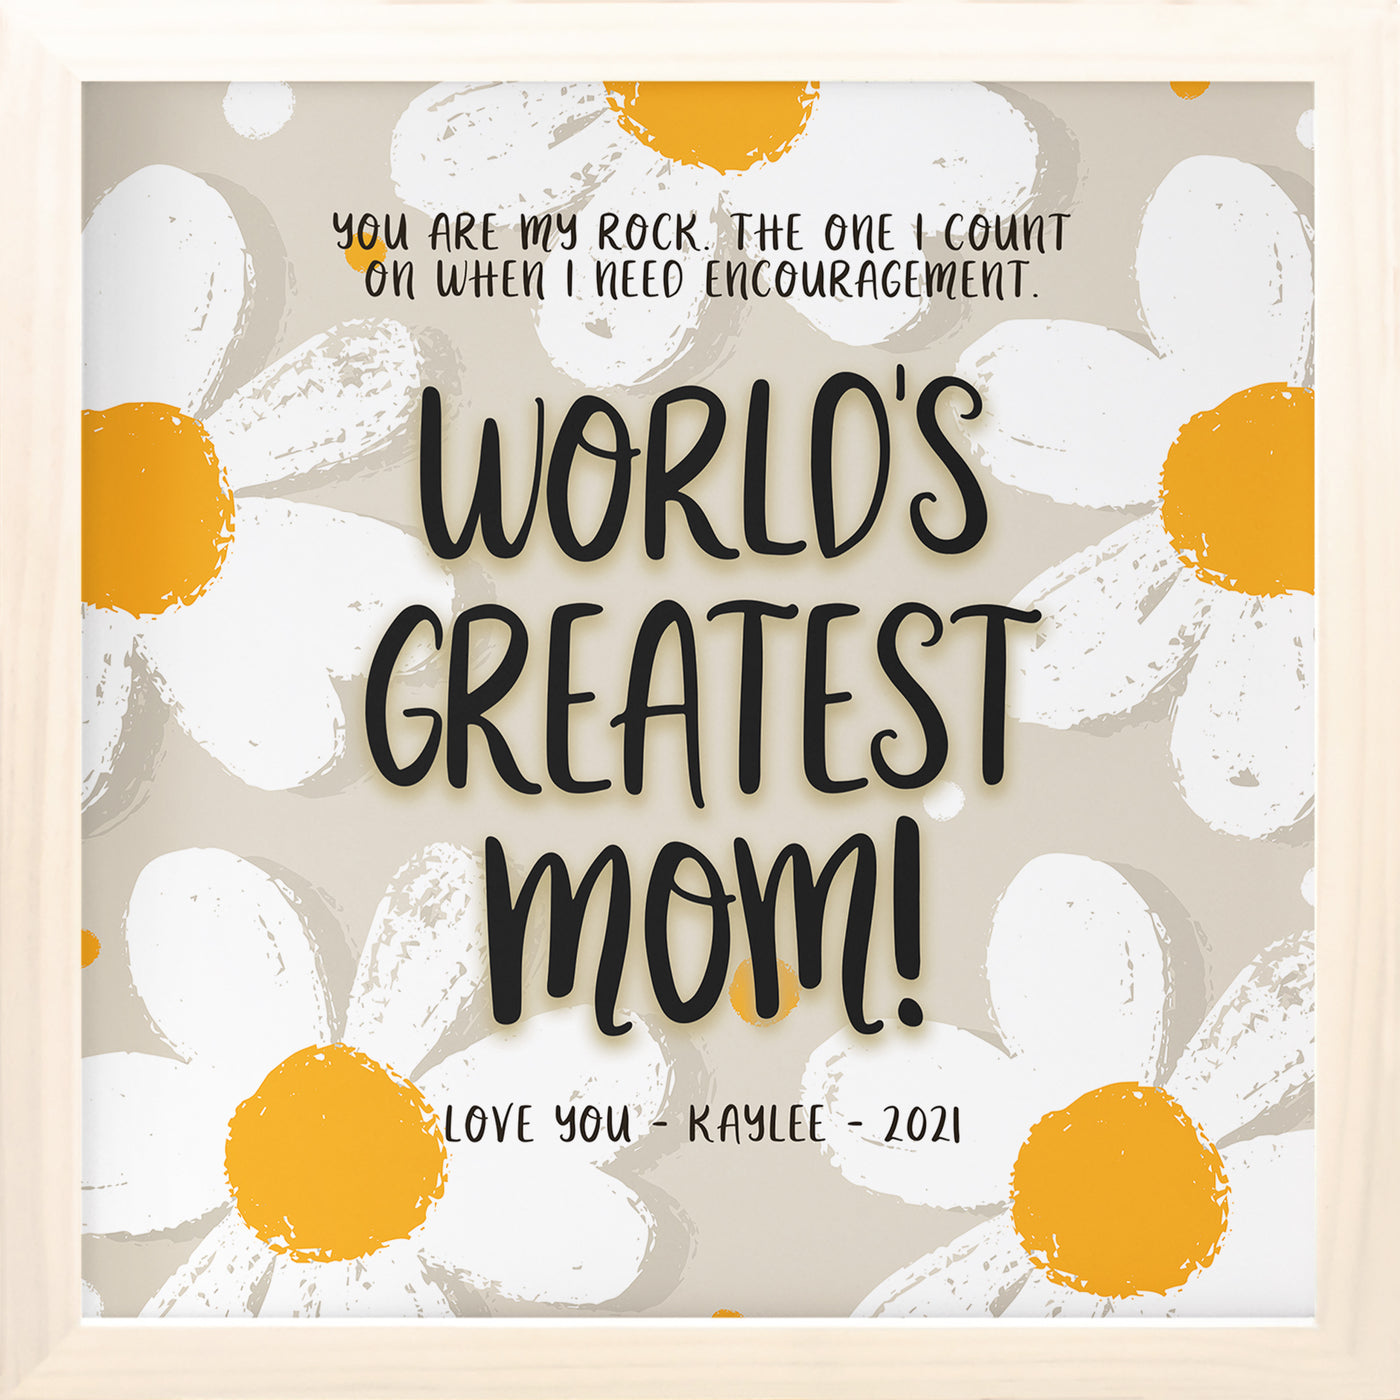 World's Greatest Mom | Personalized Mom Mother's Day Birthday Print, Wall Decor - Daisy